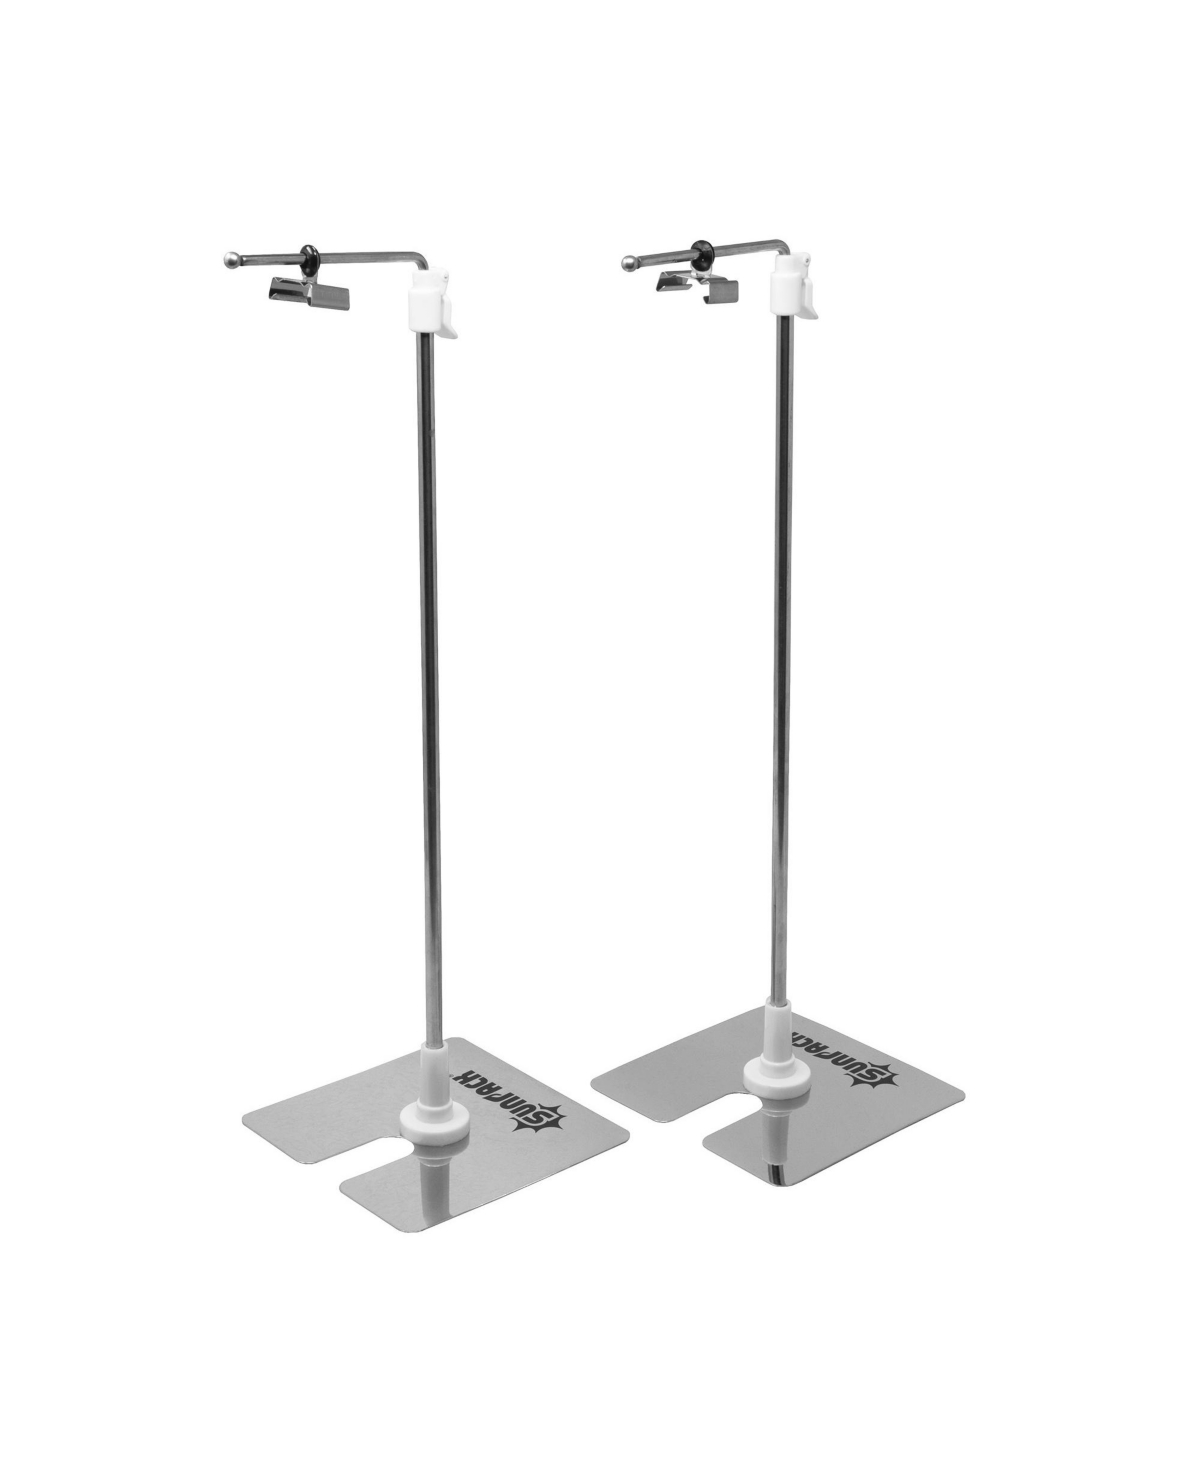 Mini Single Light Stand for Indoor Seed Starting Gardening - Silver